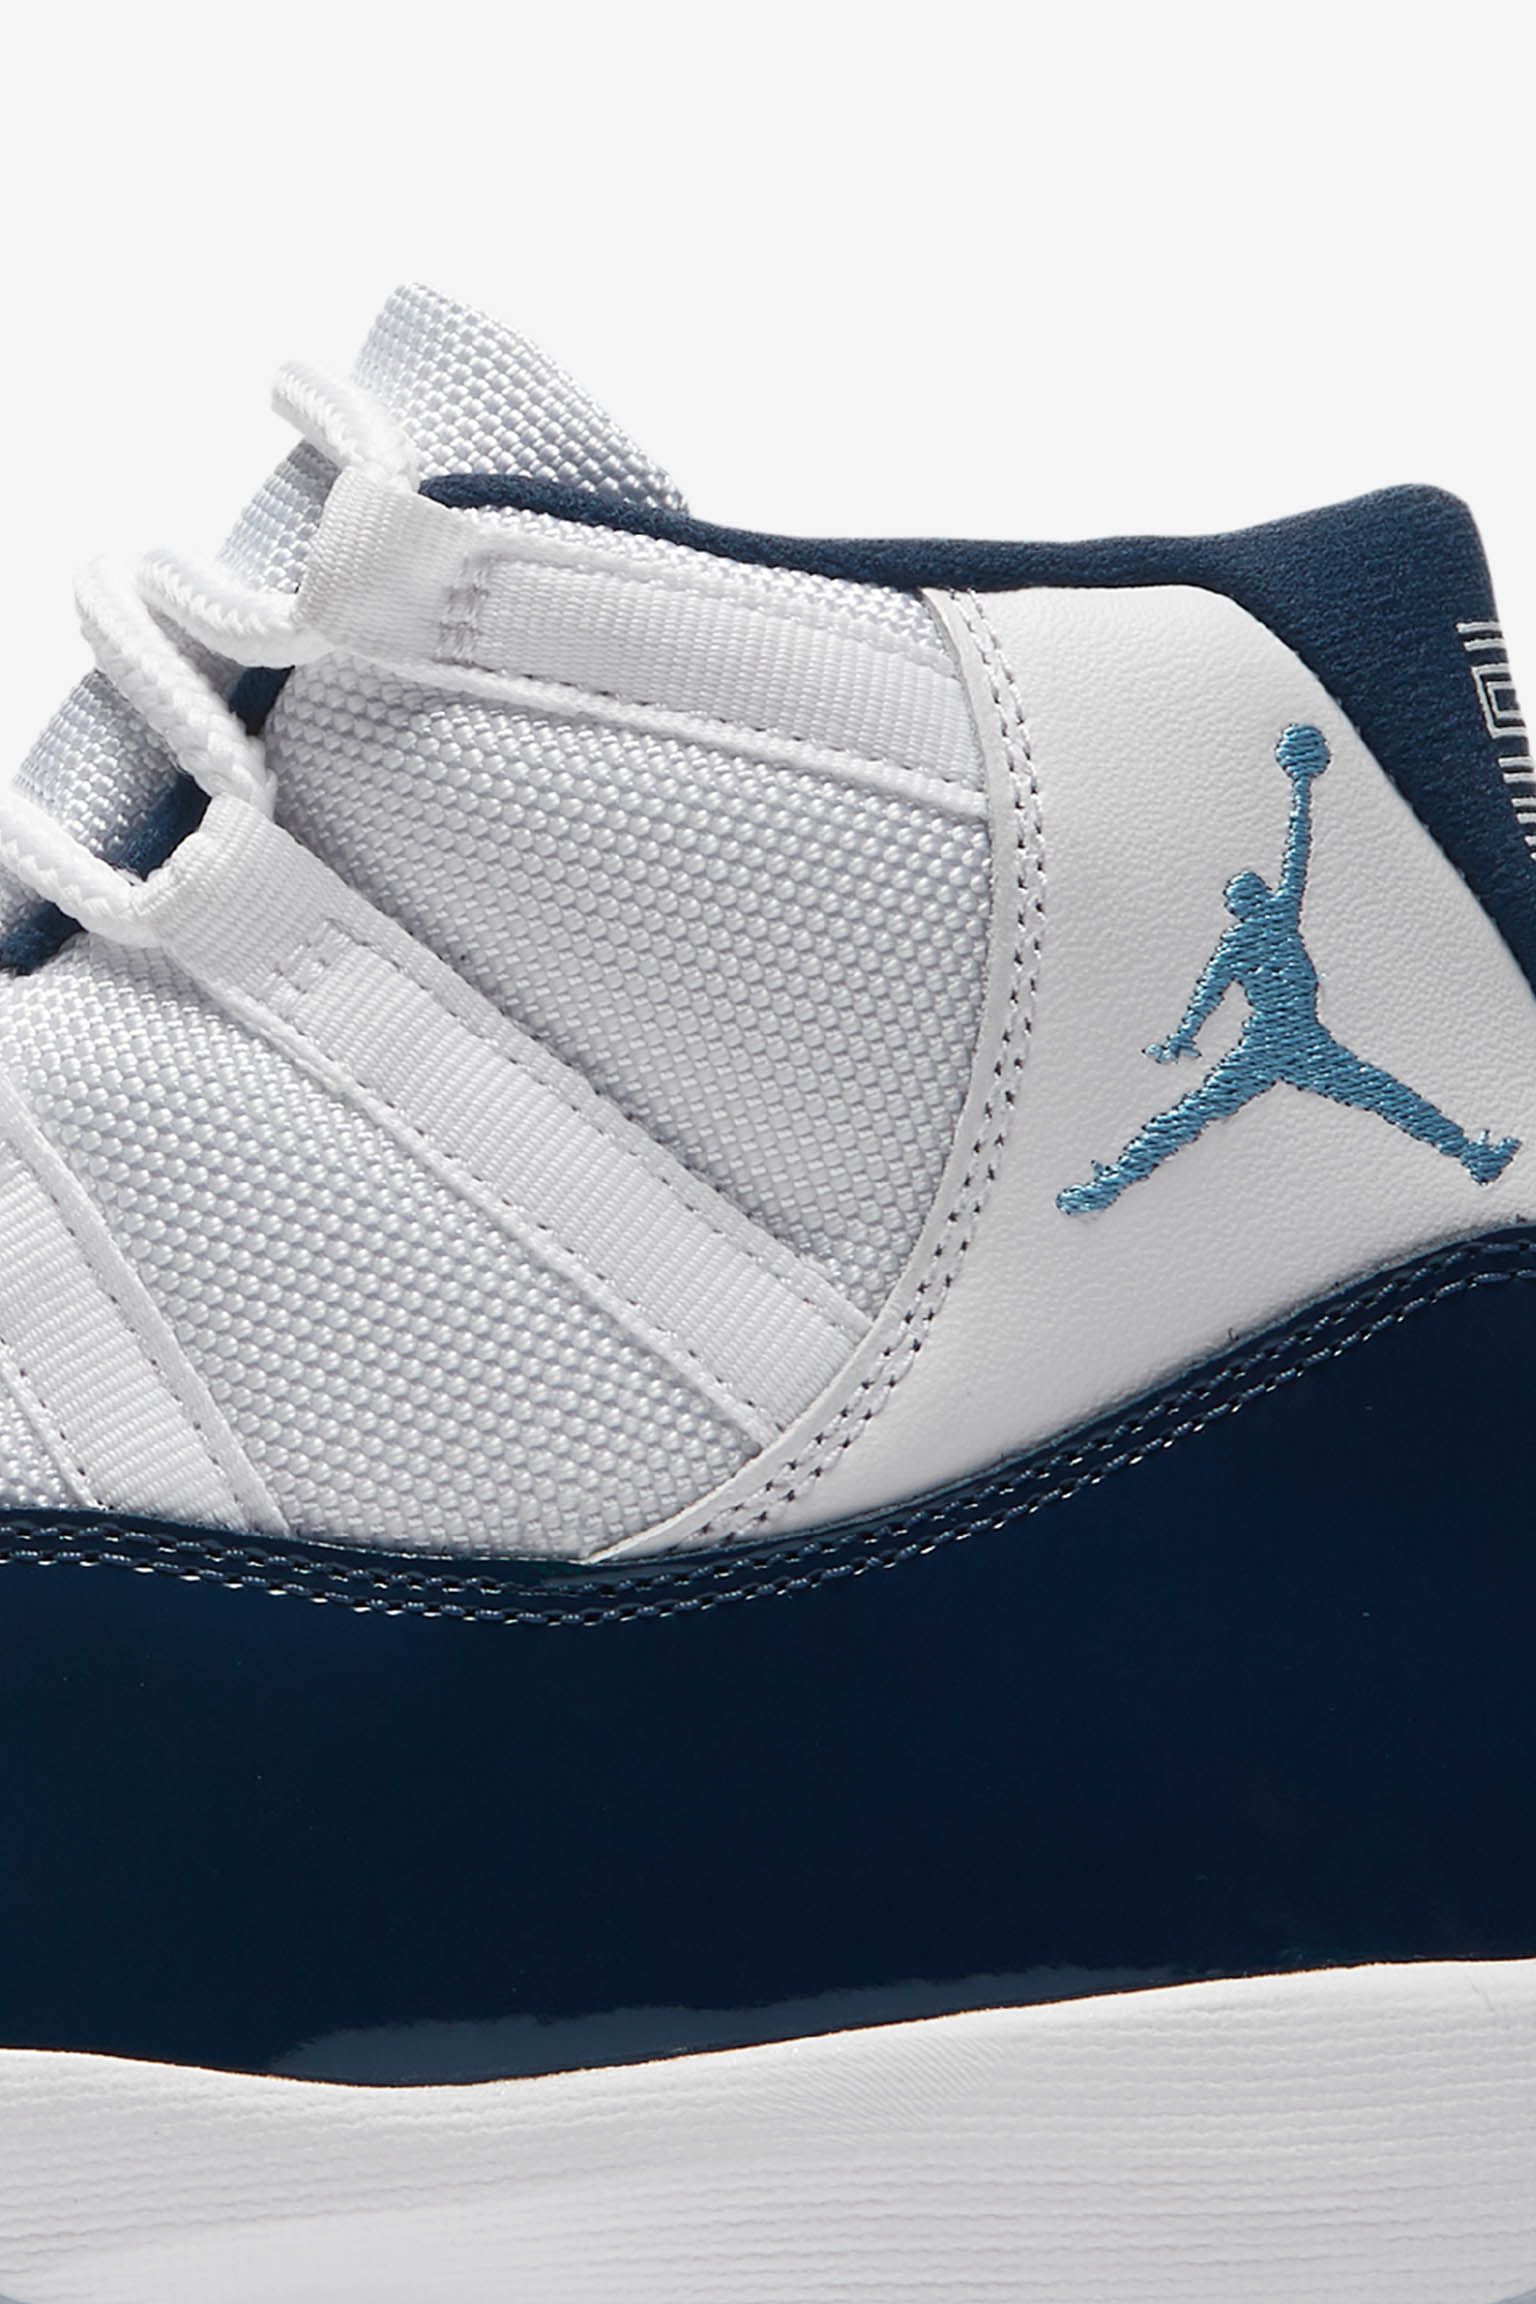 blue and white jordans 11 release date